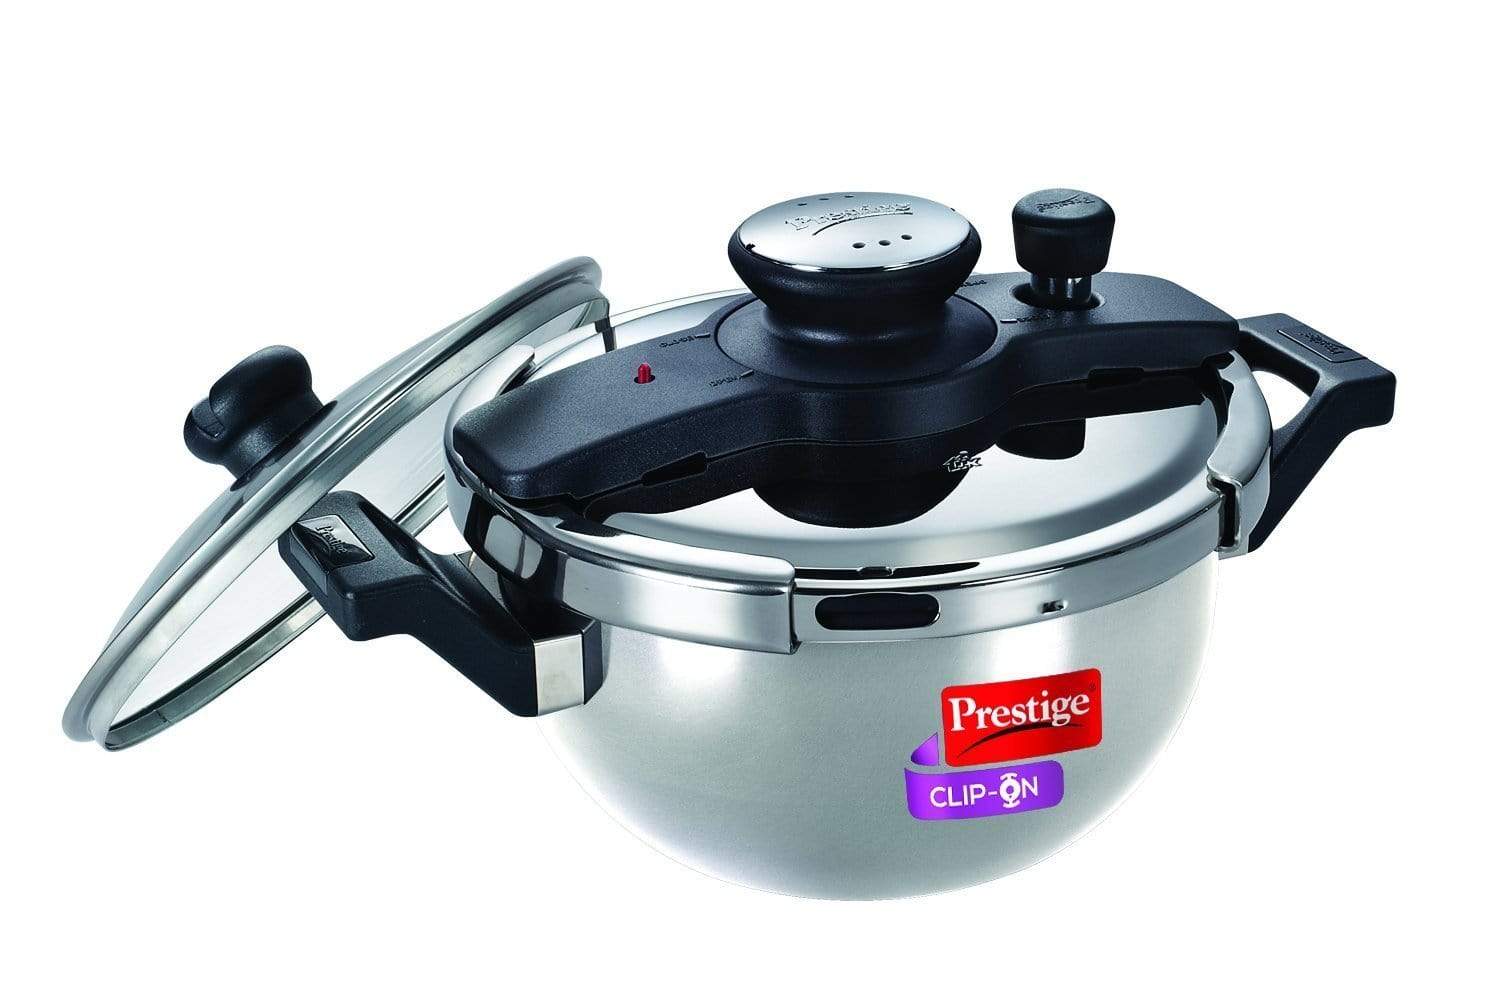 Prestige Clip On Stainless Steel Pressure Cooker with Glass Lid - KITCHEN MART